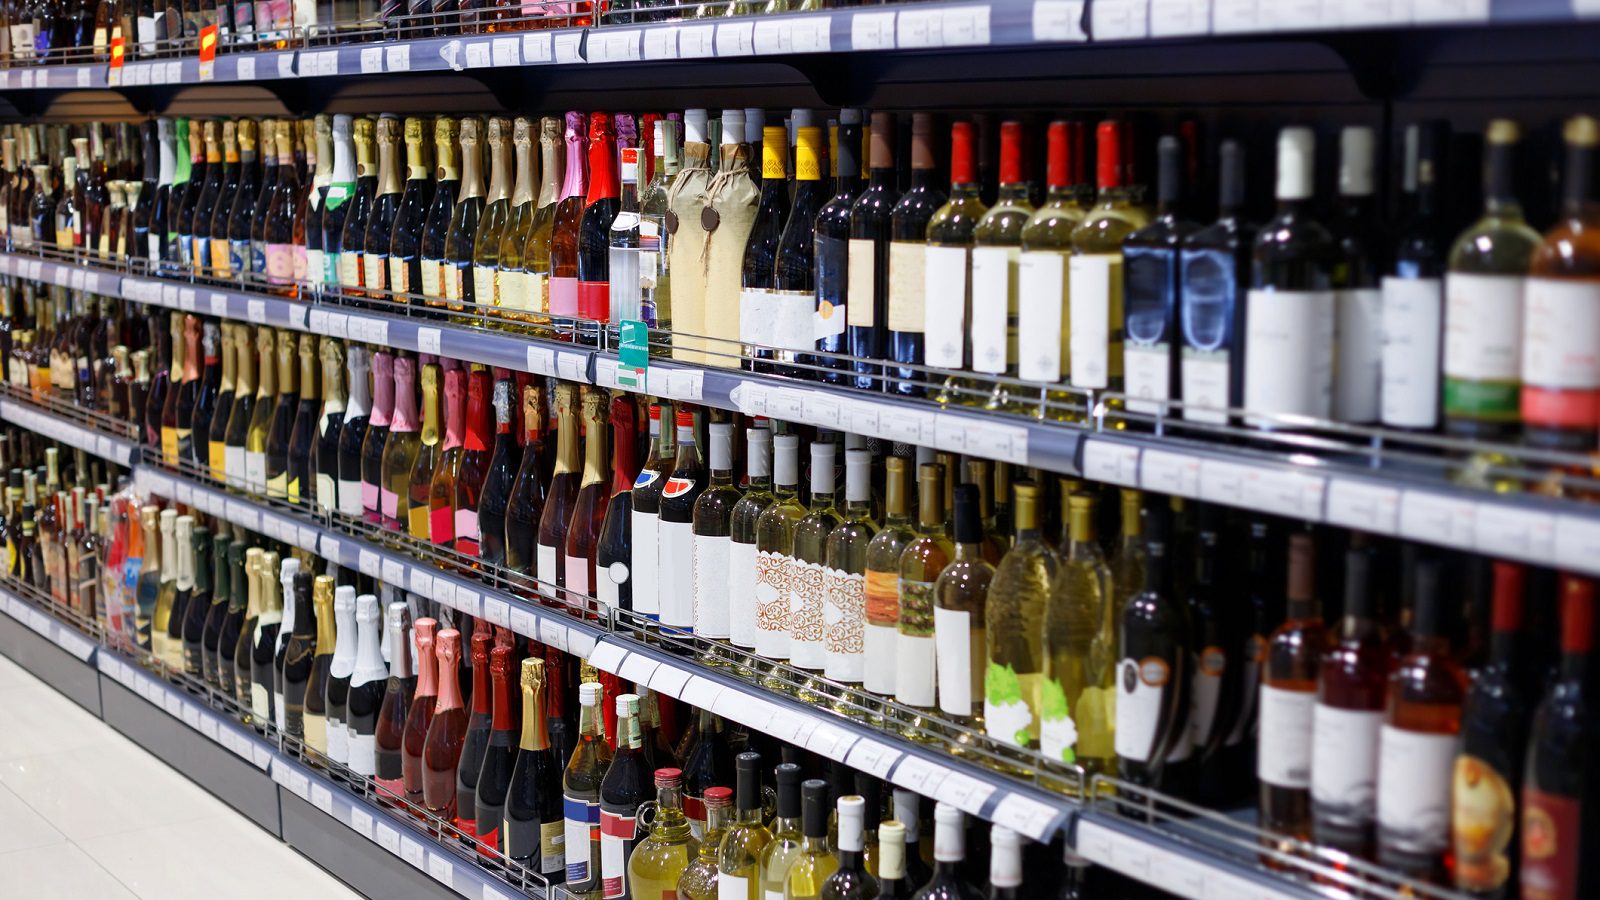 Featured image for “Privatizing Liquor Distribution: The Pros and Cons”